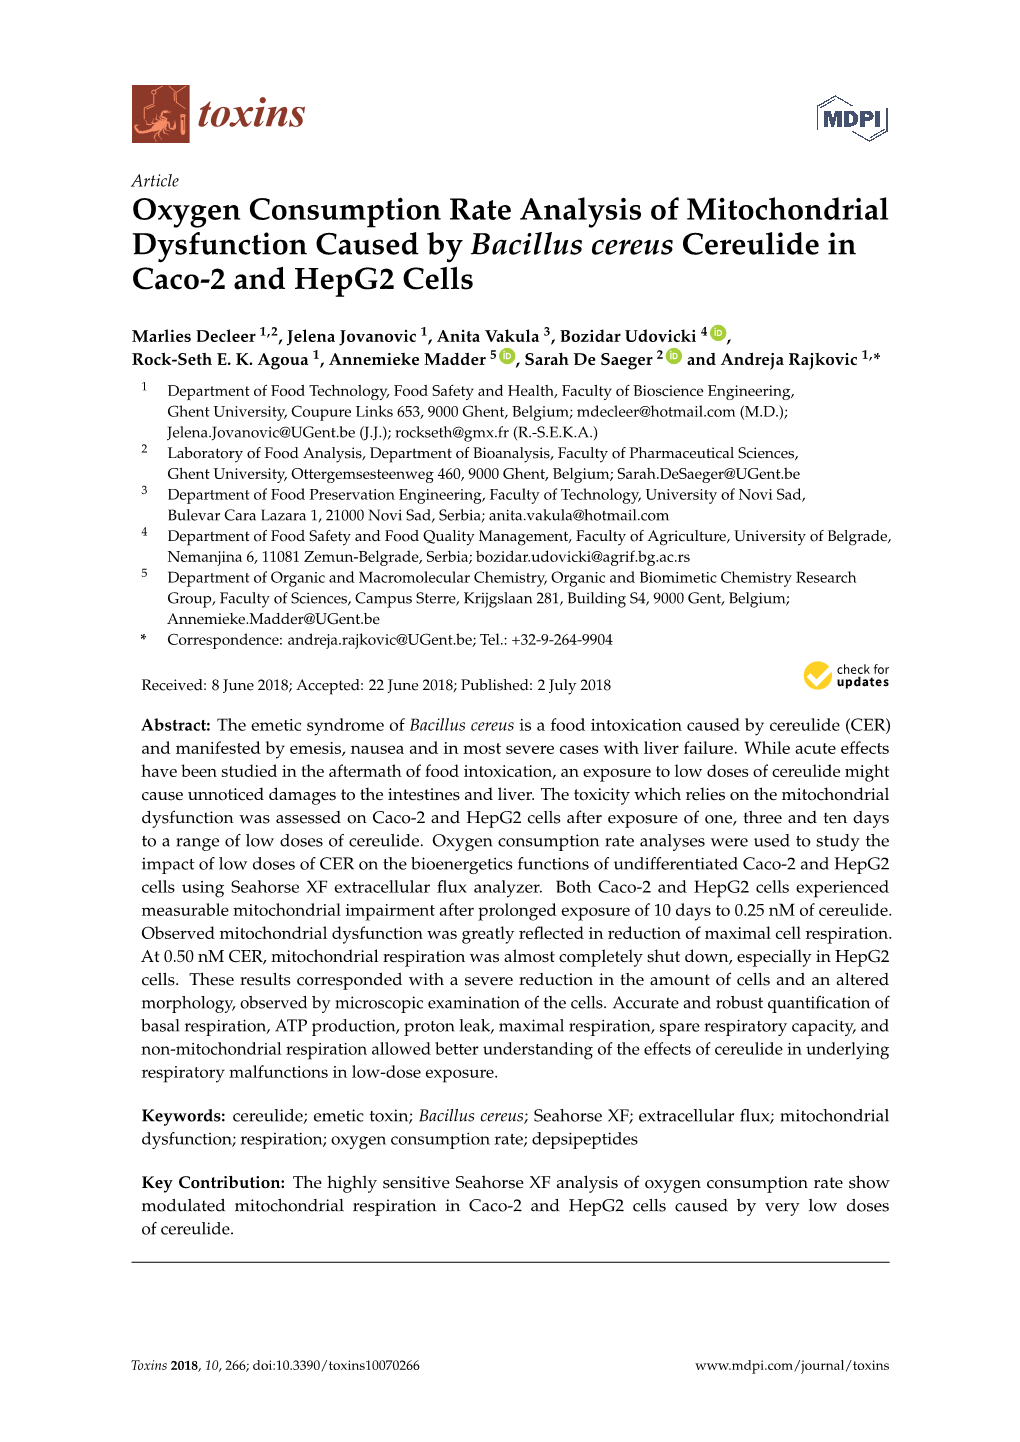 Oxygen Consumption Rate Analysis of Mitochondrial Dysfunction Caused by Bacillus Cereus Cereulide in Caco-2 and Hepg2 Cells